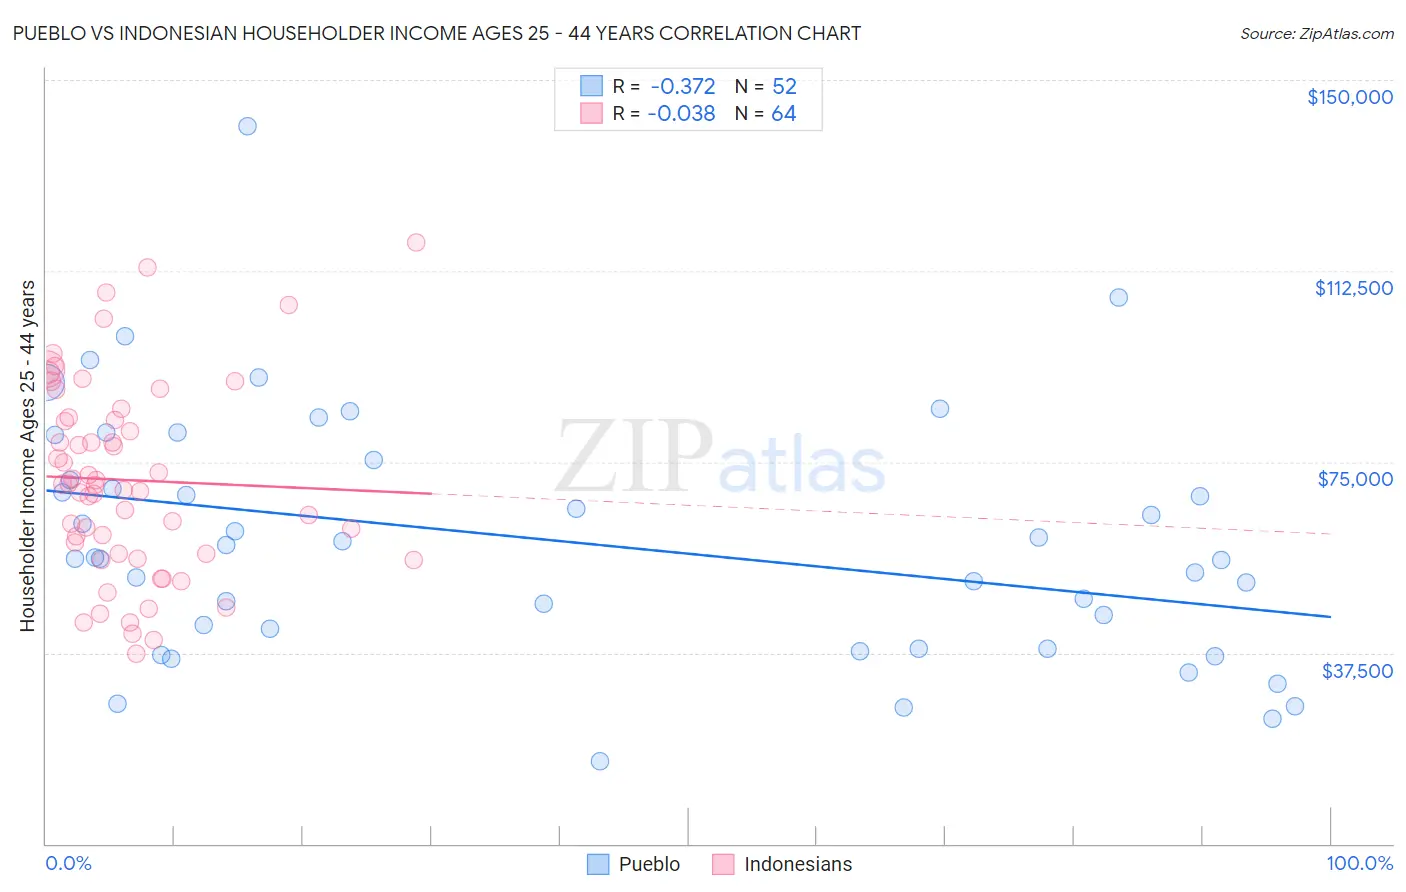 Pueblo vs Indonesian Householder Income Ages 25 - 44 years